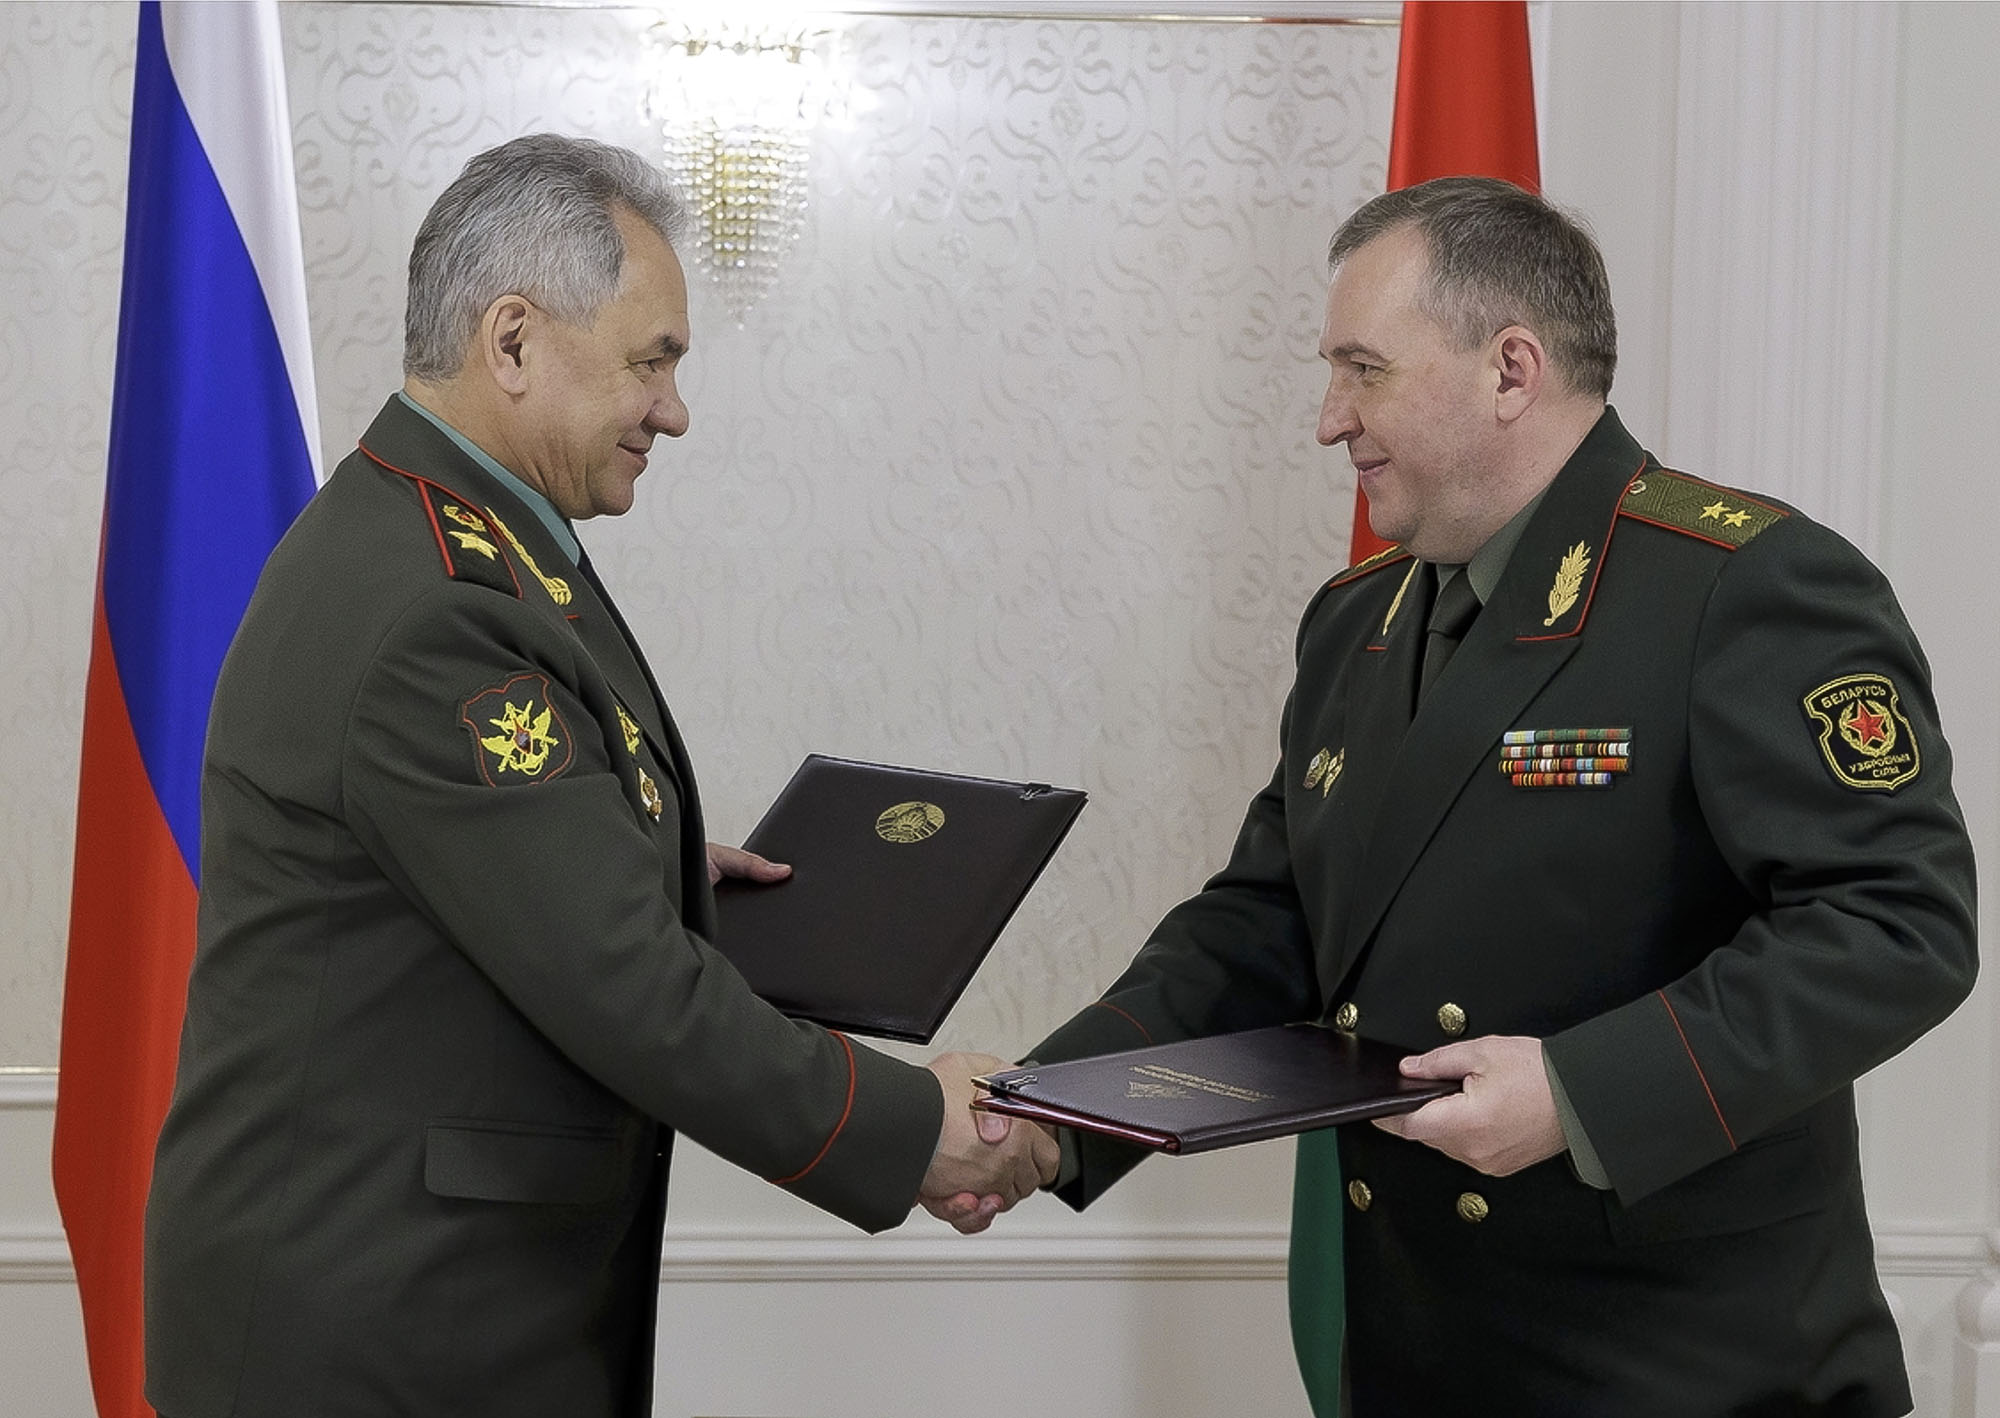 Russian Defense Minister Sergei Shoigu, left, and Belarusian Defense Minister Viktor Khrenin exchange documents during a meeting after a session of the Council of Defense Ministers of the Collective Security Treaty Organization (CSTO) in Minsk, Belarus, on May 25.